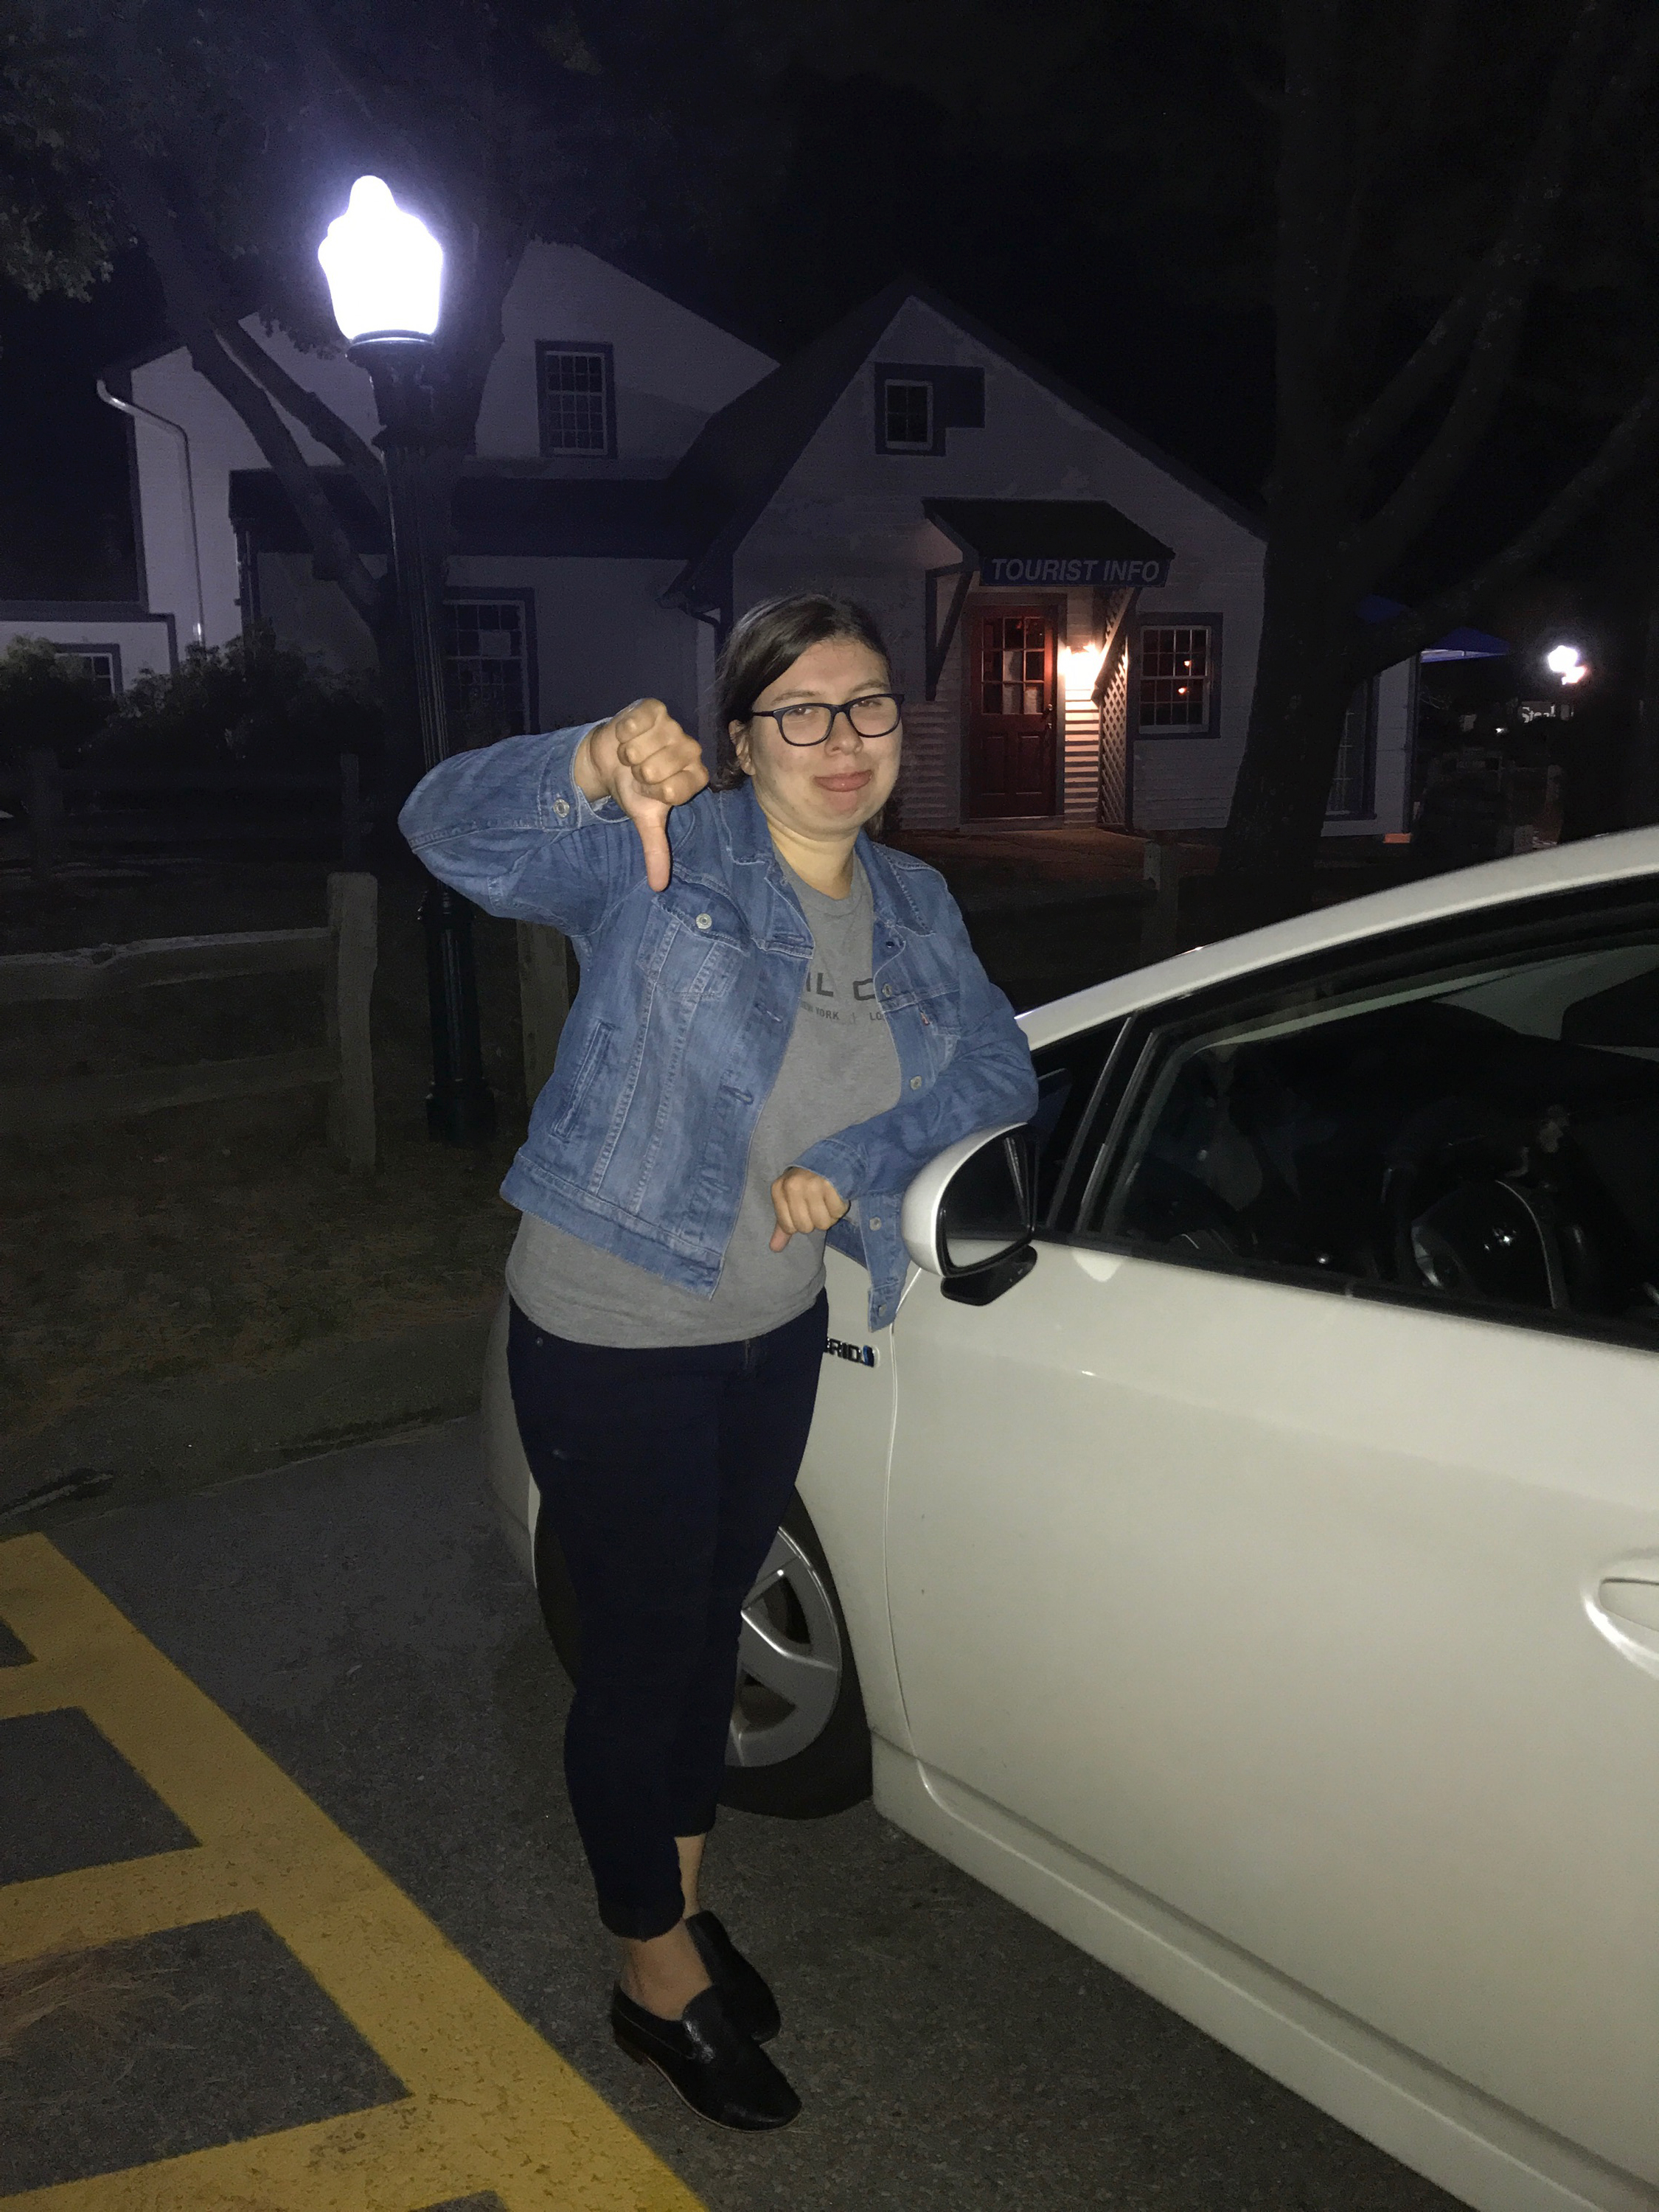 Julia poses with the thumbs down in front of a white compact car